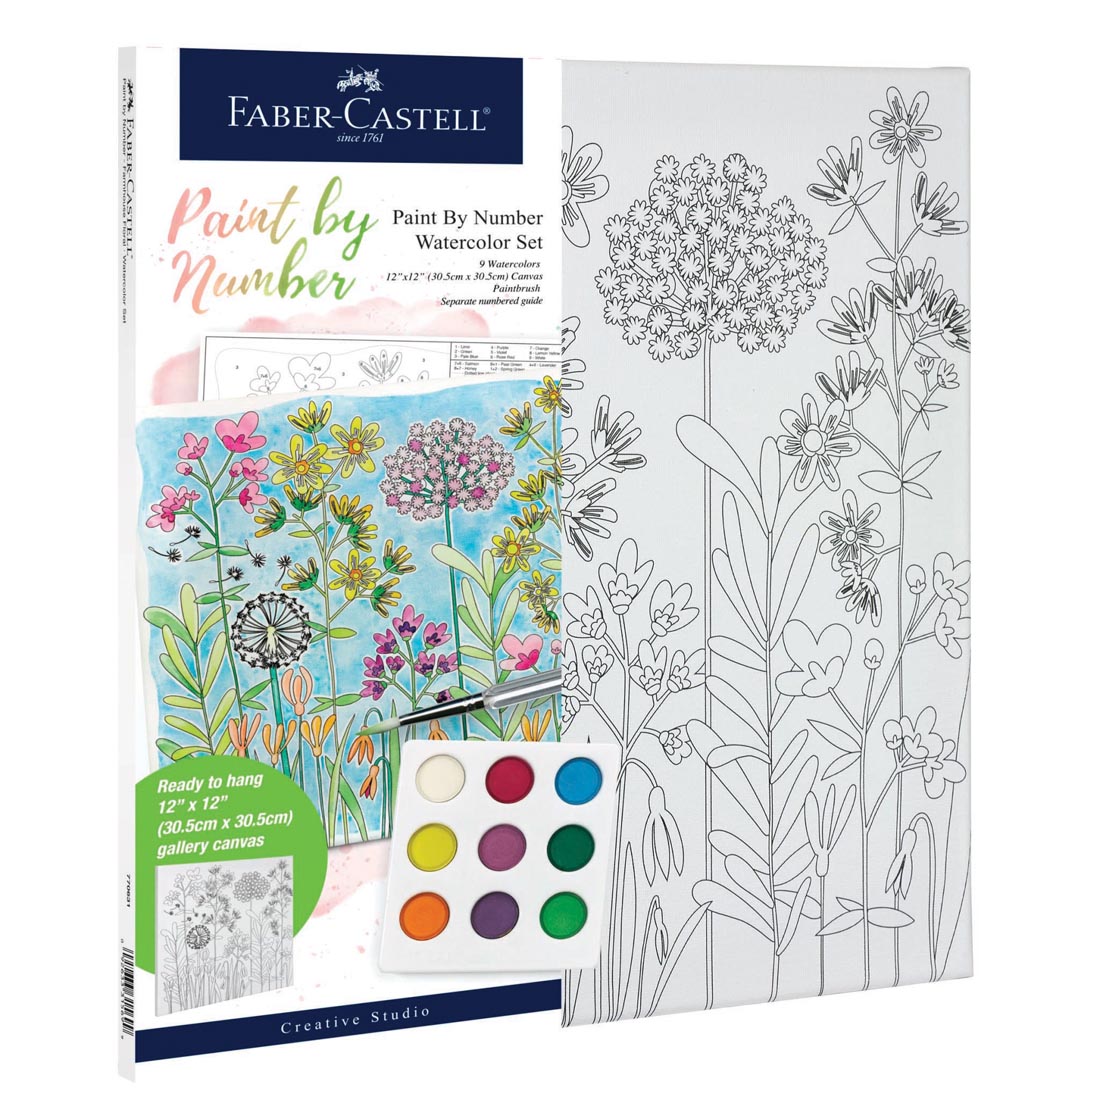 Faber-Castell Paint By Number Farmhouse Floral Watercolor Set